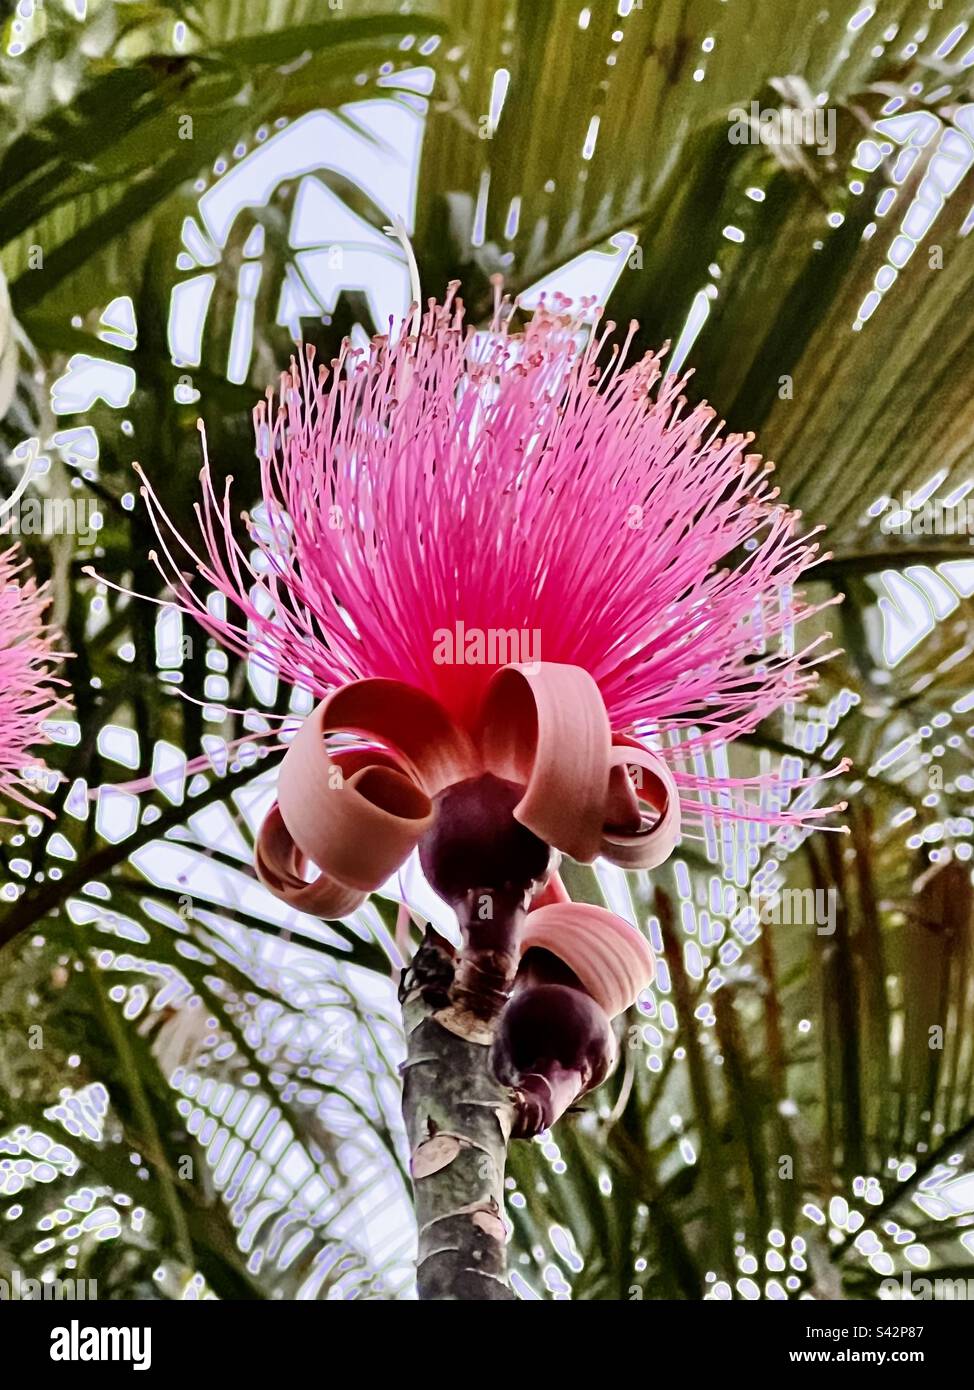 BOMBAX/ AMAPOLA Shaving Brush Tree flowers have shaving-brush- like 'bristles' with about 400 pollen-producing stamens and one stigma-bearing style, all slender, stiff and pink. Stock Photo